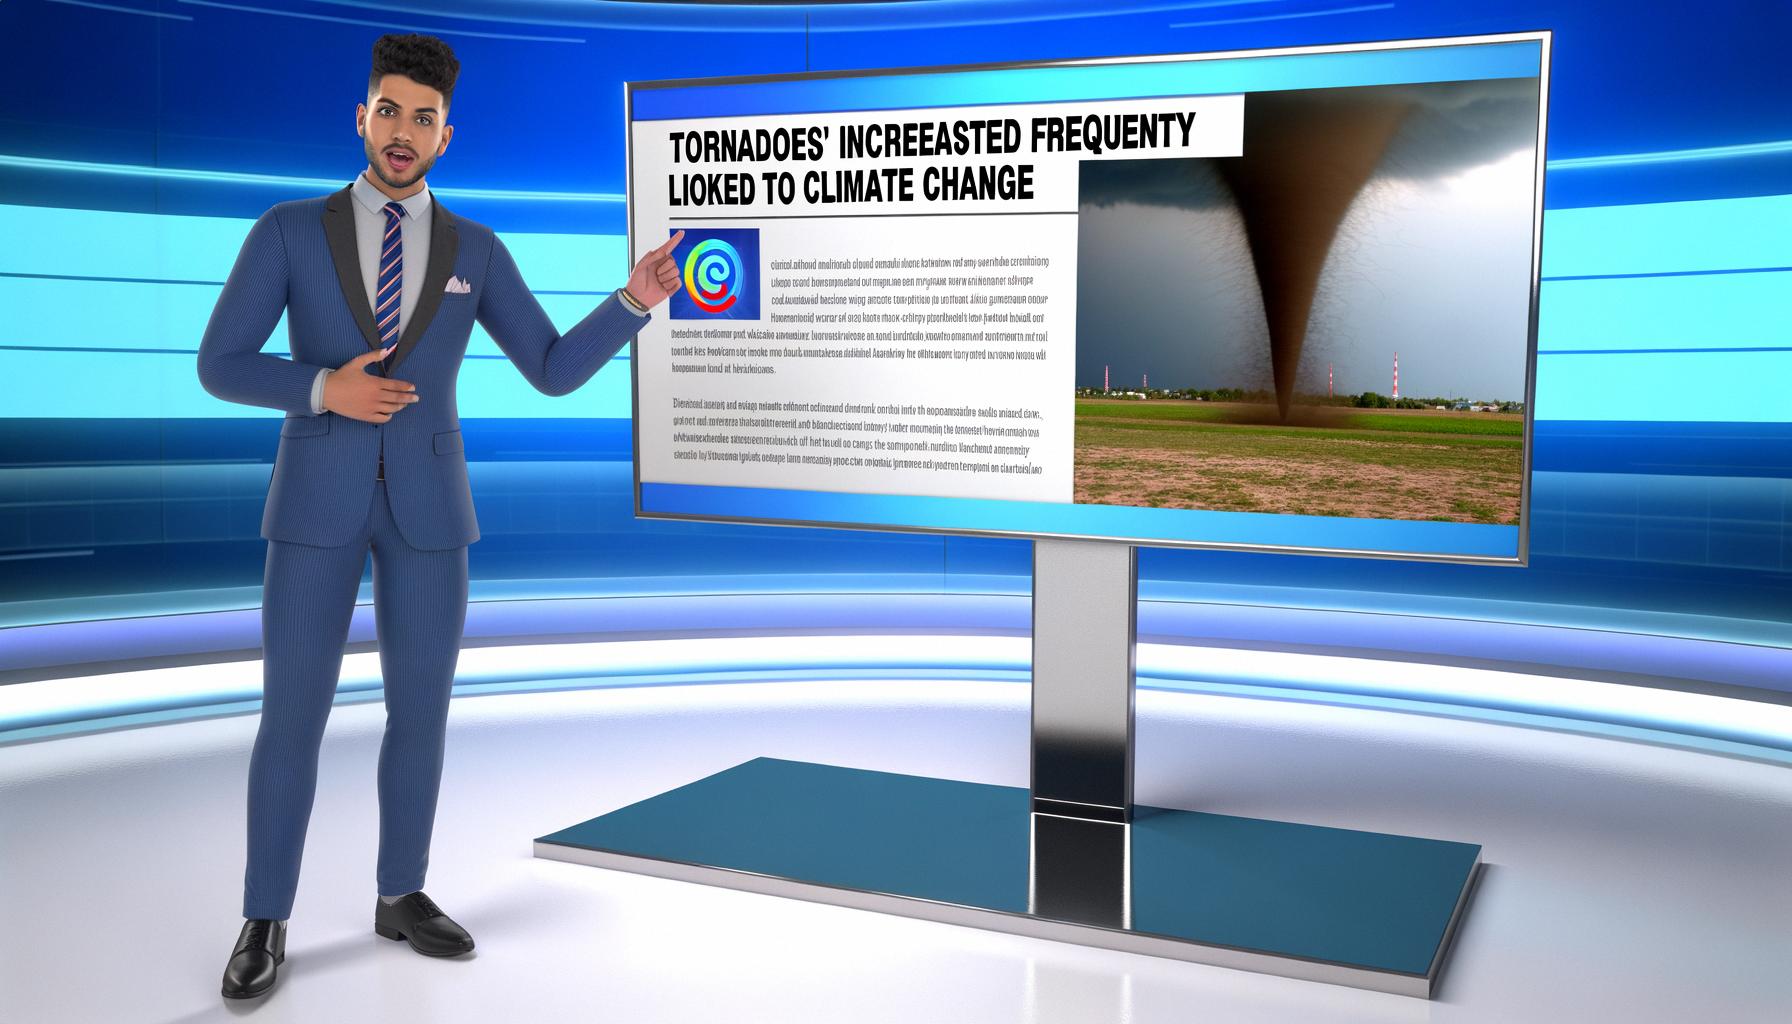 Tornadoes' increased frequency linked to climate change